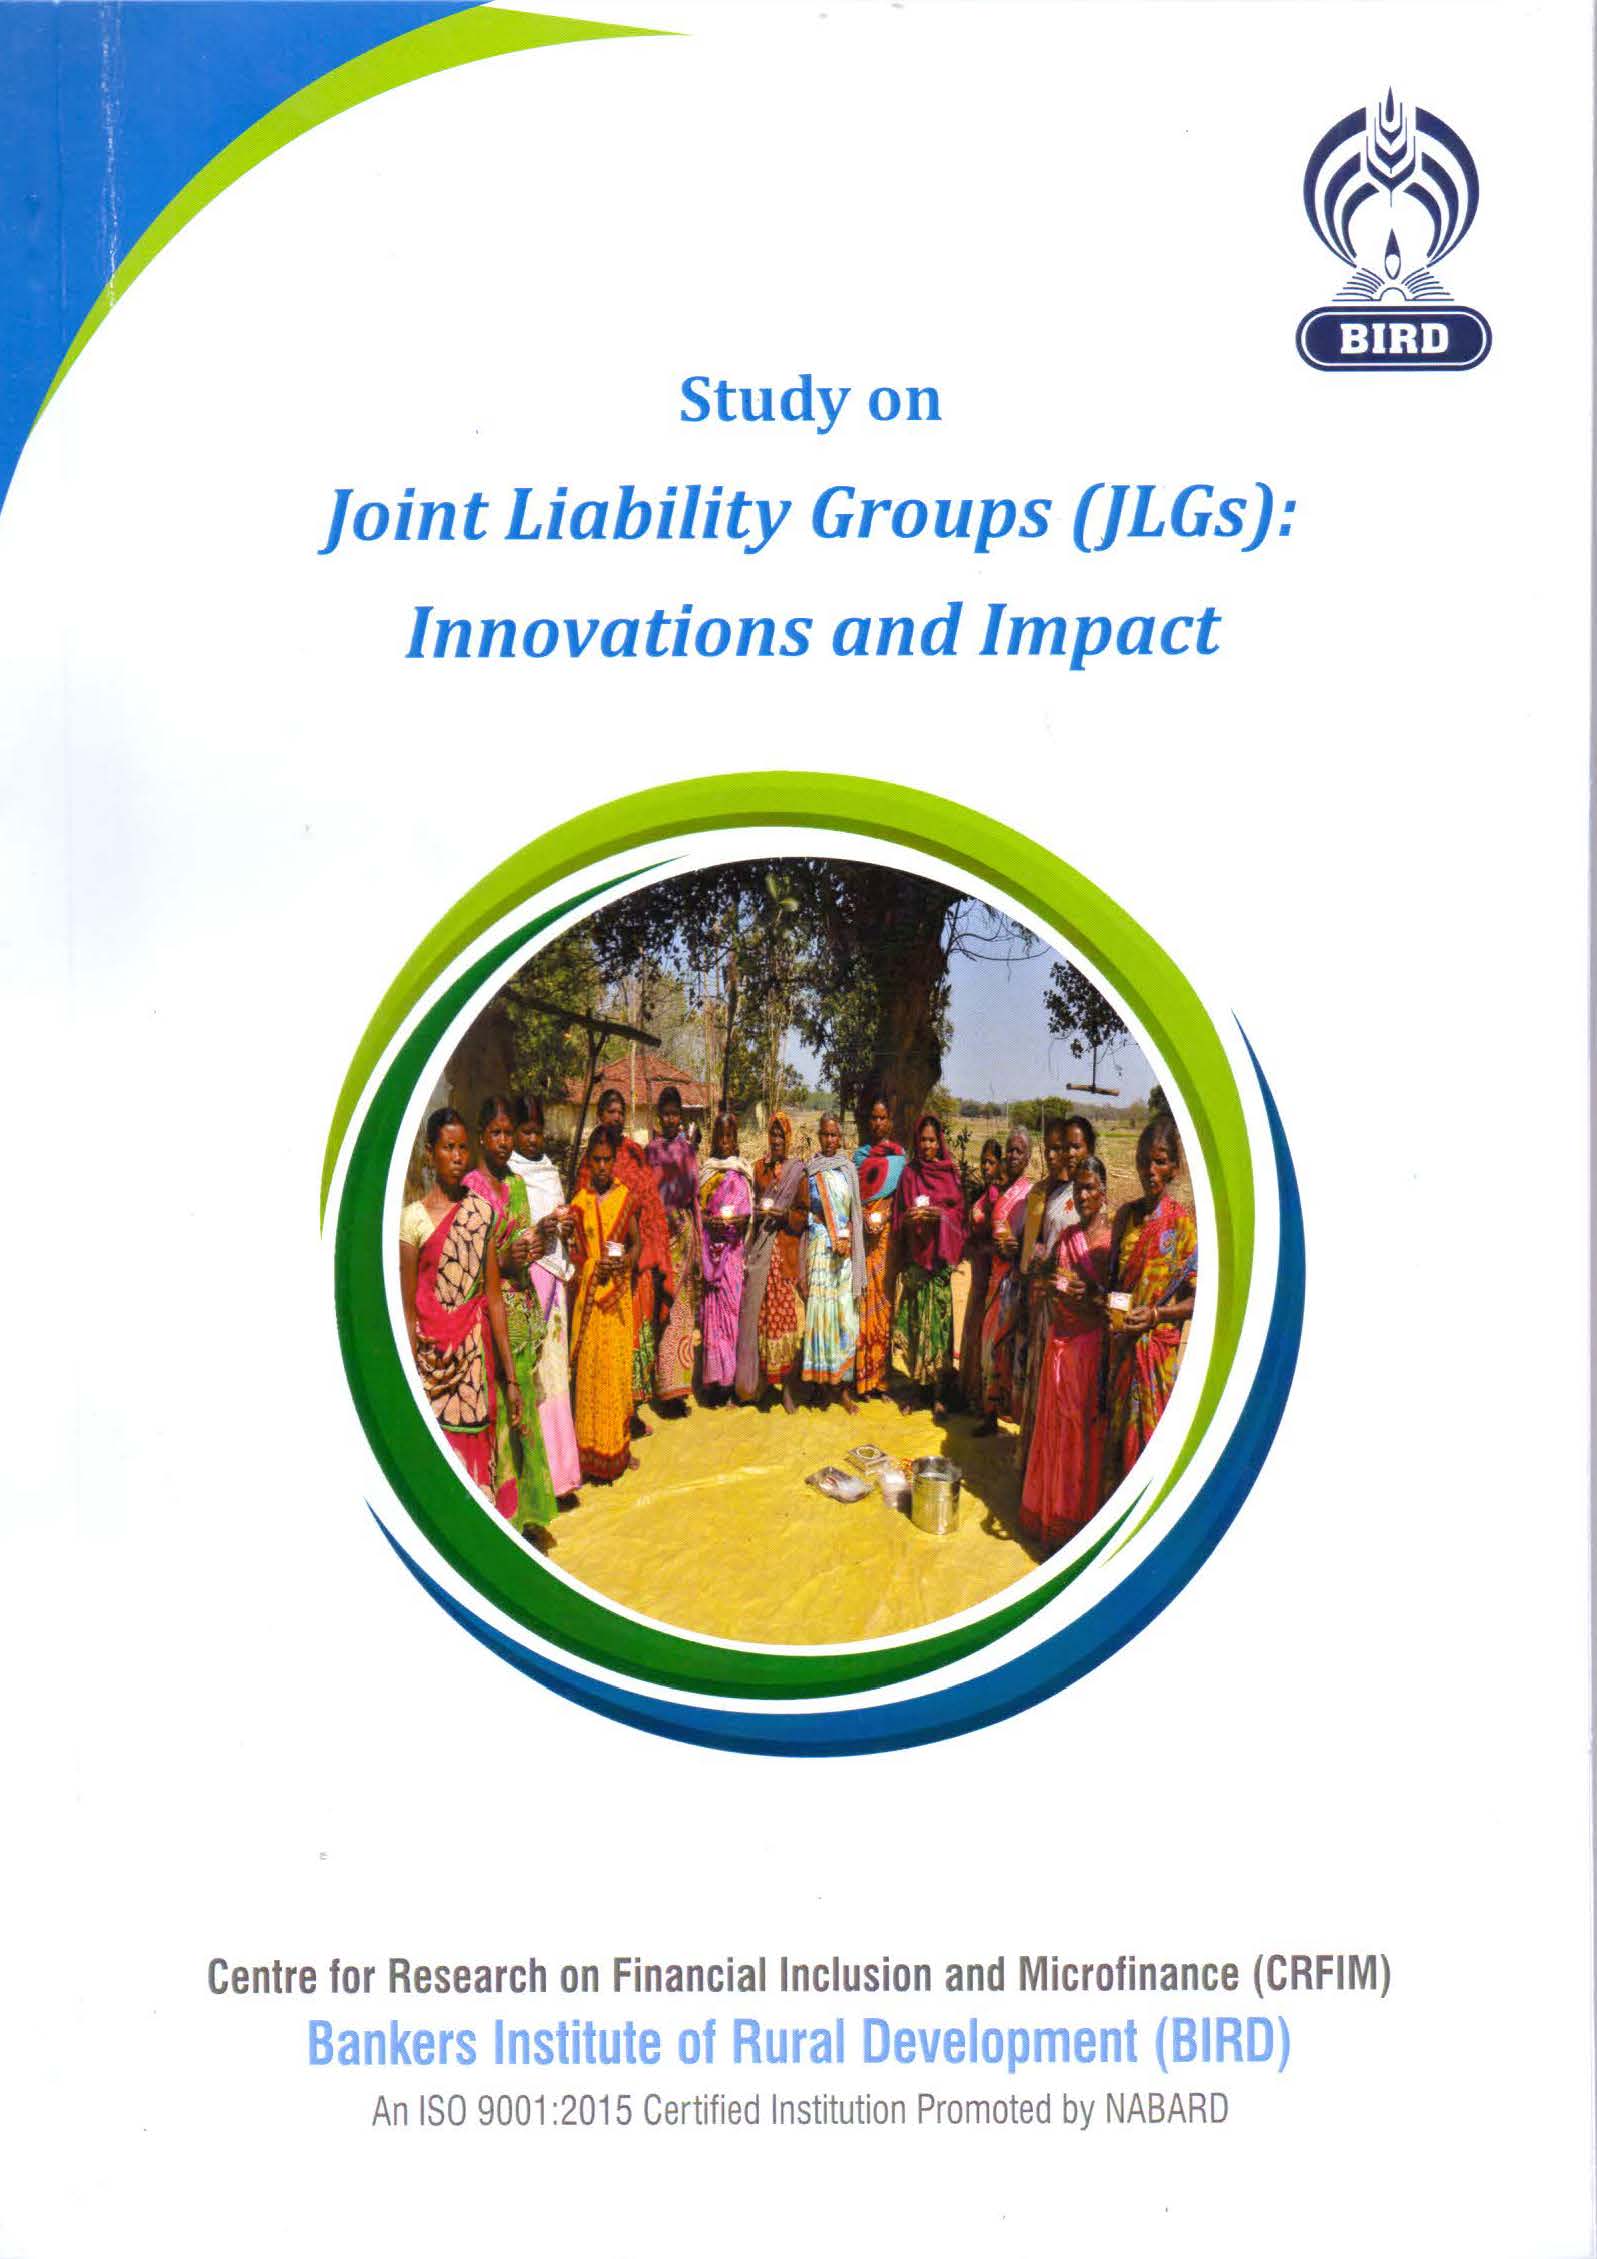 Study on Joint Liability Groups (JLGs): Innovations and Impact